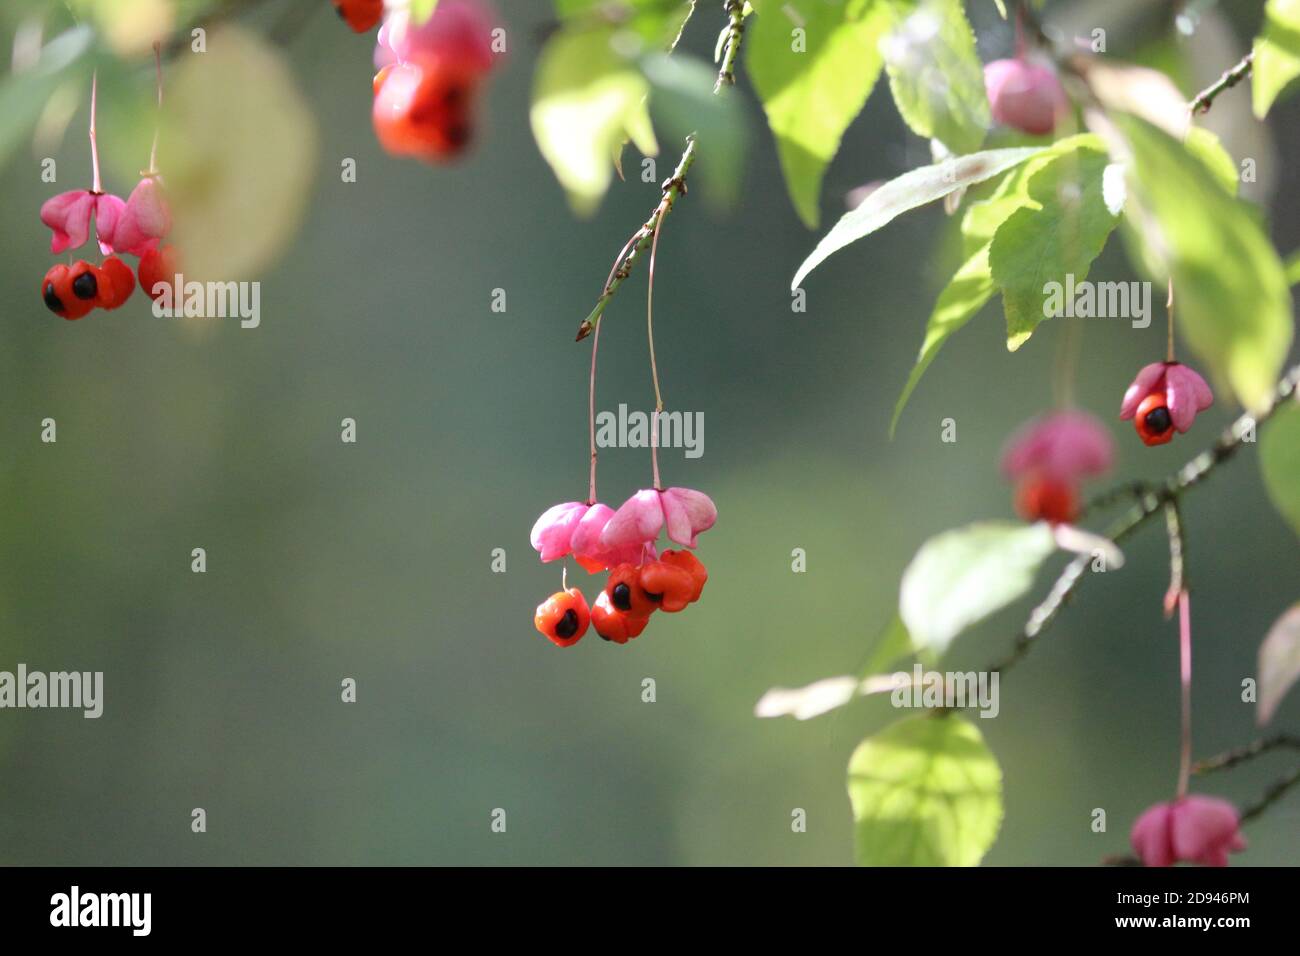 Euonymus verrucosus or Warty-barked Spindle. Ripe pink orange poisonous wild berries on a green slightly yellowed branch close-up in the forest. Stock Photo